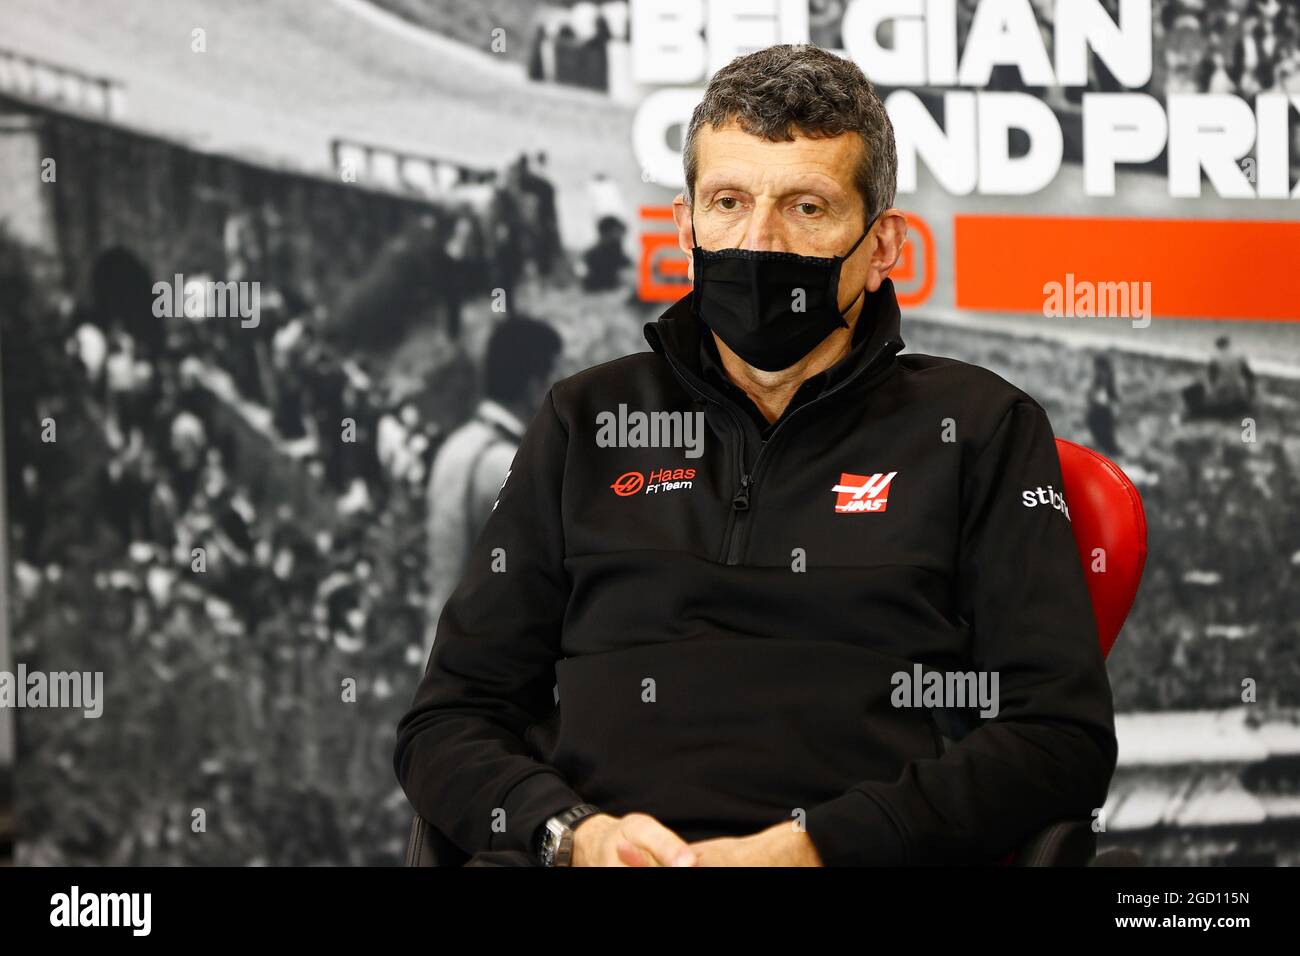 Guenther Steiner (ITA) Haas F1 Team Prinicipal in the FIA Press Conference. Belgian Grand Prix, Friday 28th August 2020. Spa-Francorchamps, Belgium. FIA Pool Image for Editorial Use Only Stock Photo